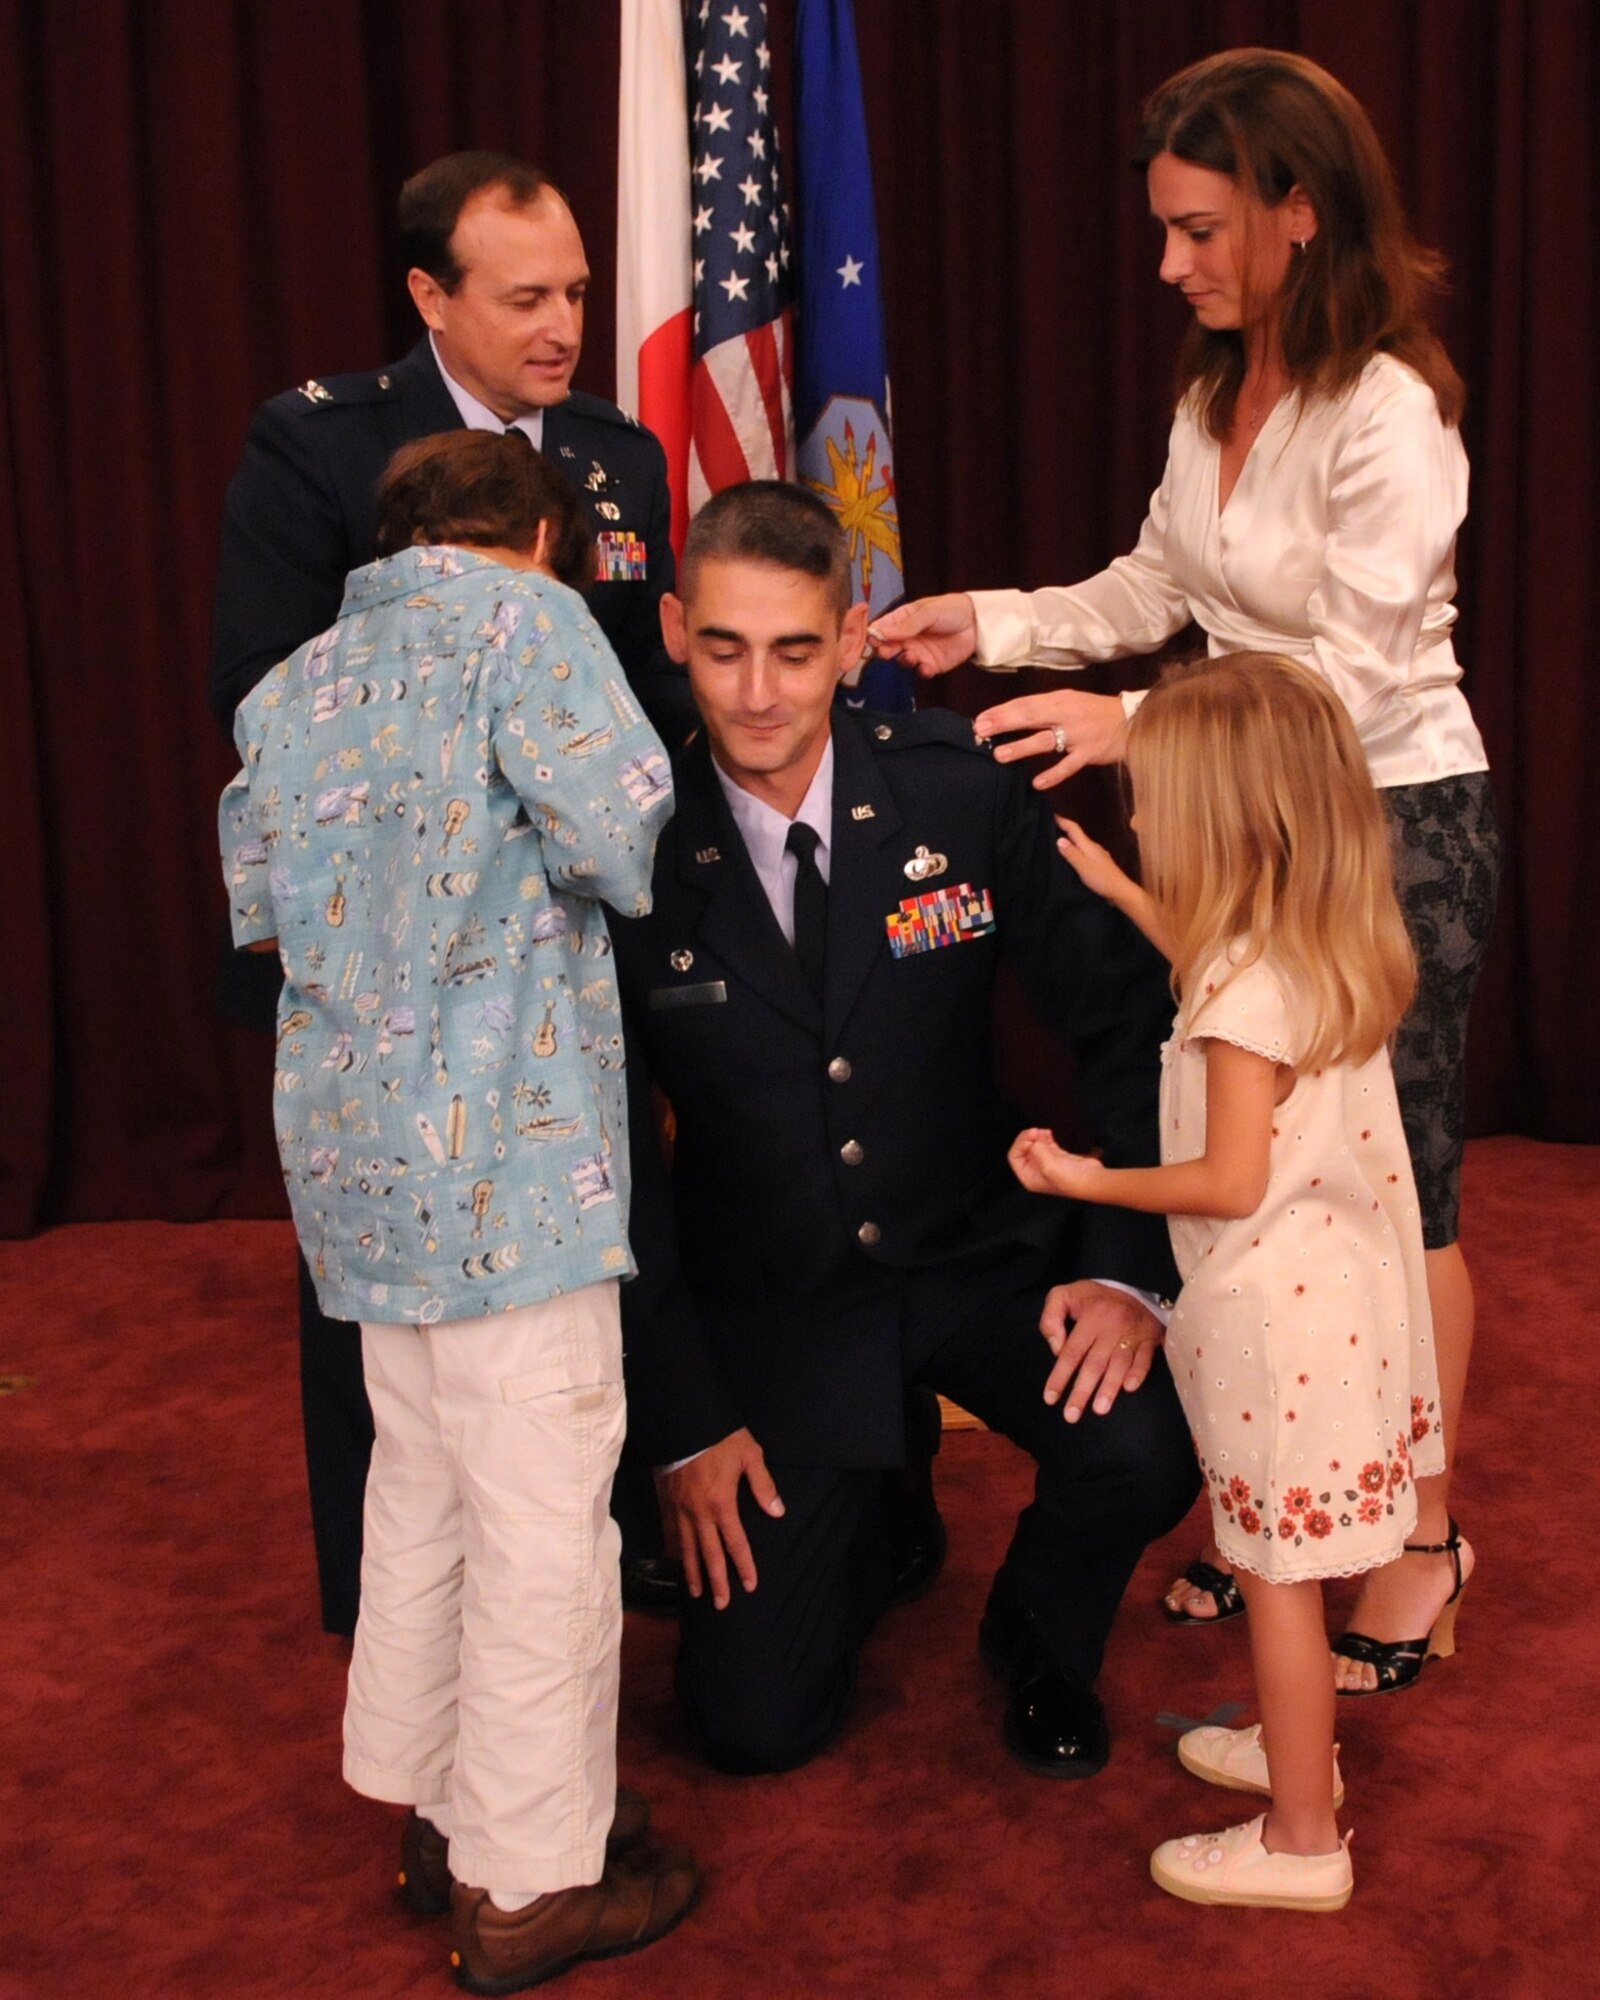 Colonel Mario Troncoso, 18th Force Support Squadron commander, has his new rank pinned on by his wife, Inanc, son Mario, daughter Smyrna and Col. Kelly Fletcher, 18th Mission Support Group commander, Oct. 30 at the Kadena Officers' Club. (U.S. Air Force photo / Airman 1st Class Amanda Grabiec) 